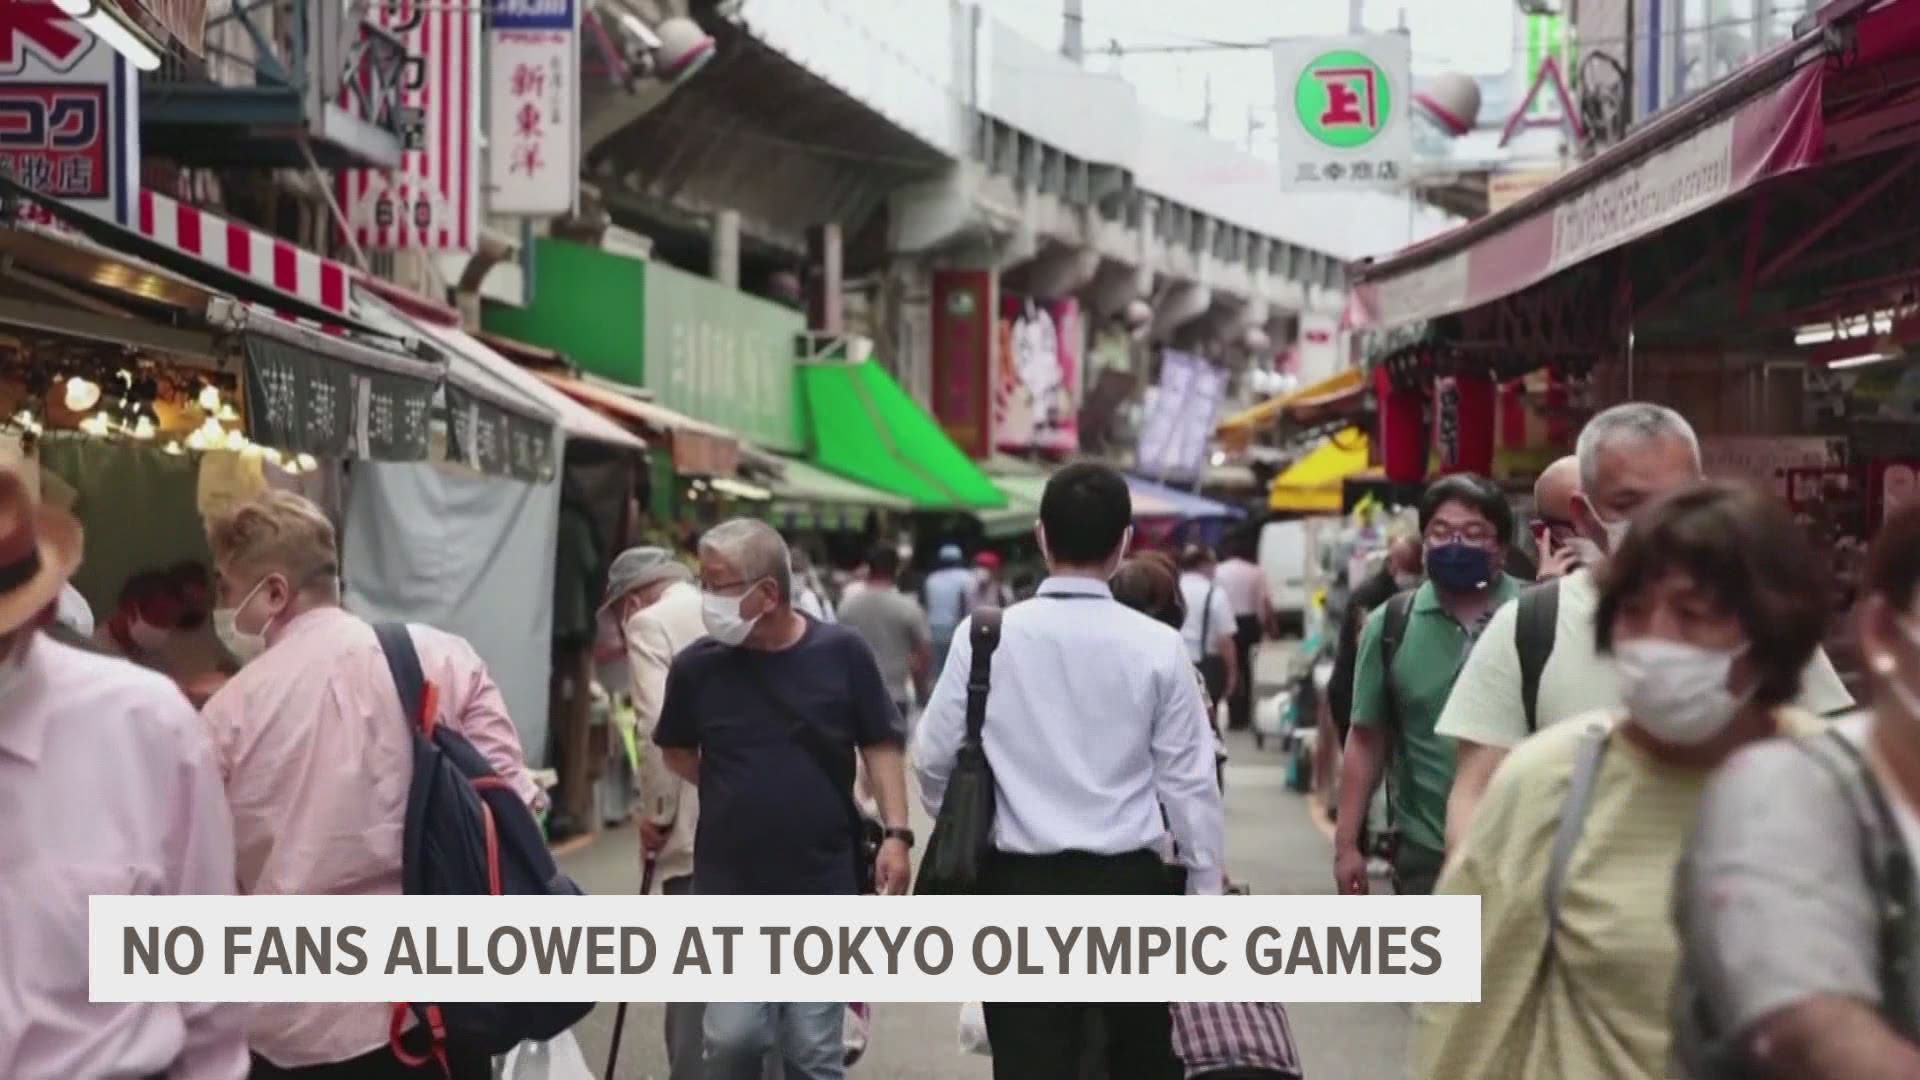 With a state of emergency declared in Japan over rising COVID-19 cases, the Tokyo Olympics will now more than ever be a made-for-TV event.